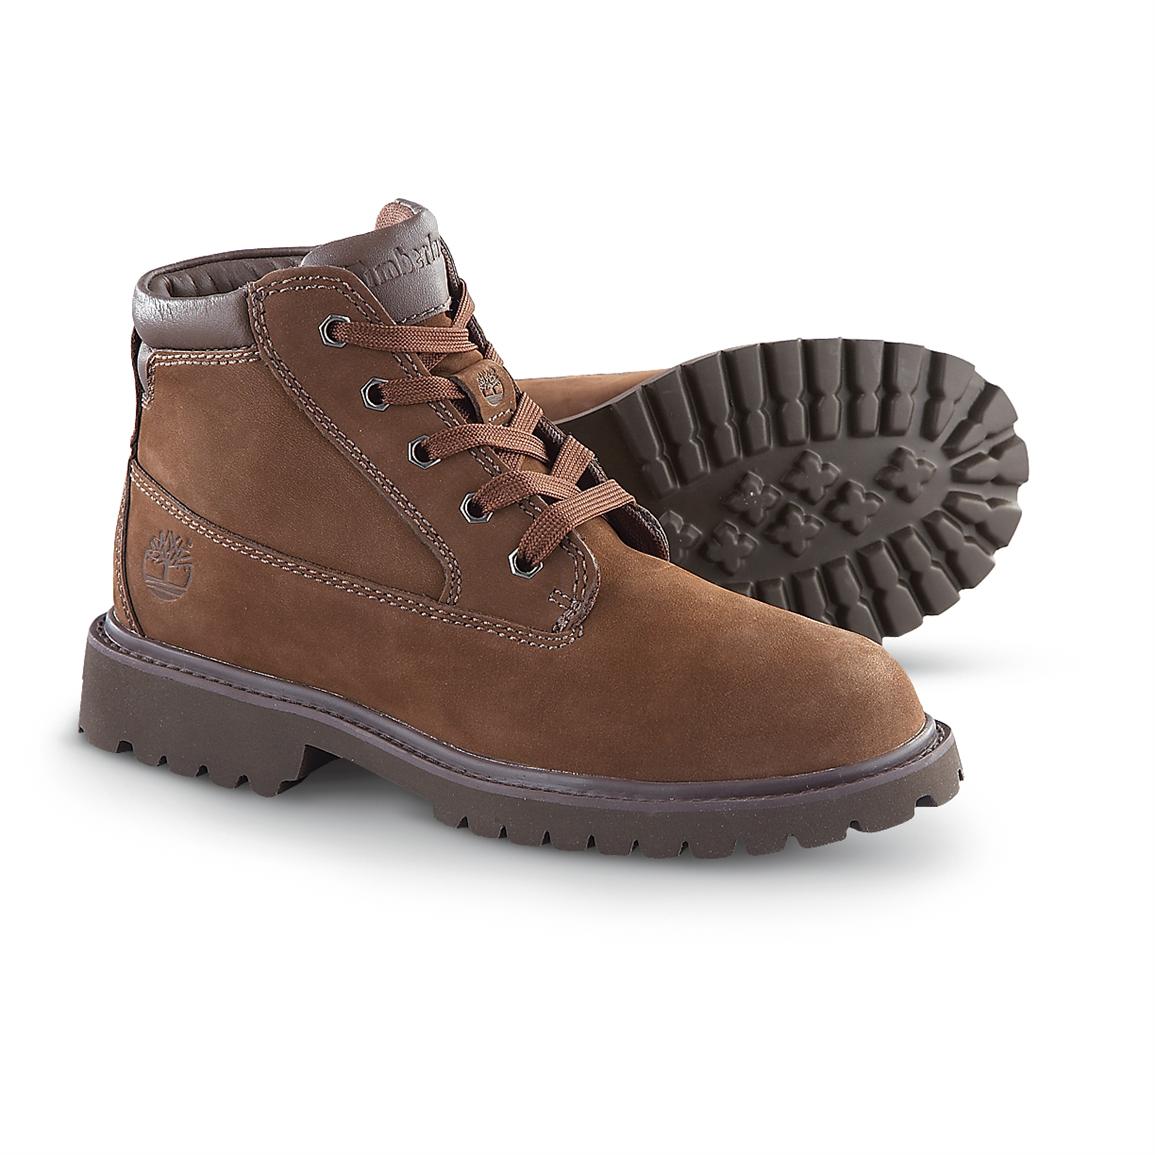 Women's Timberland® Donna Boots, Chocolate - 190702 ...